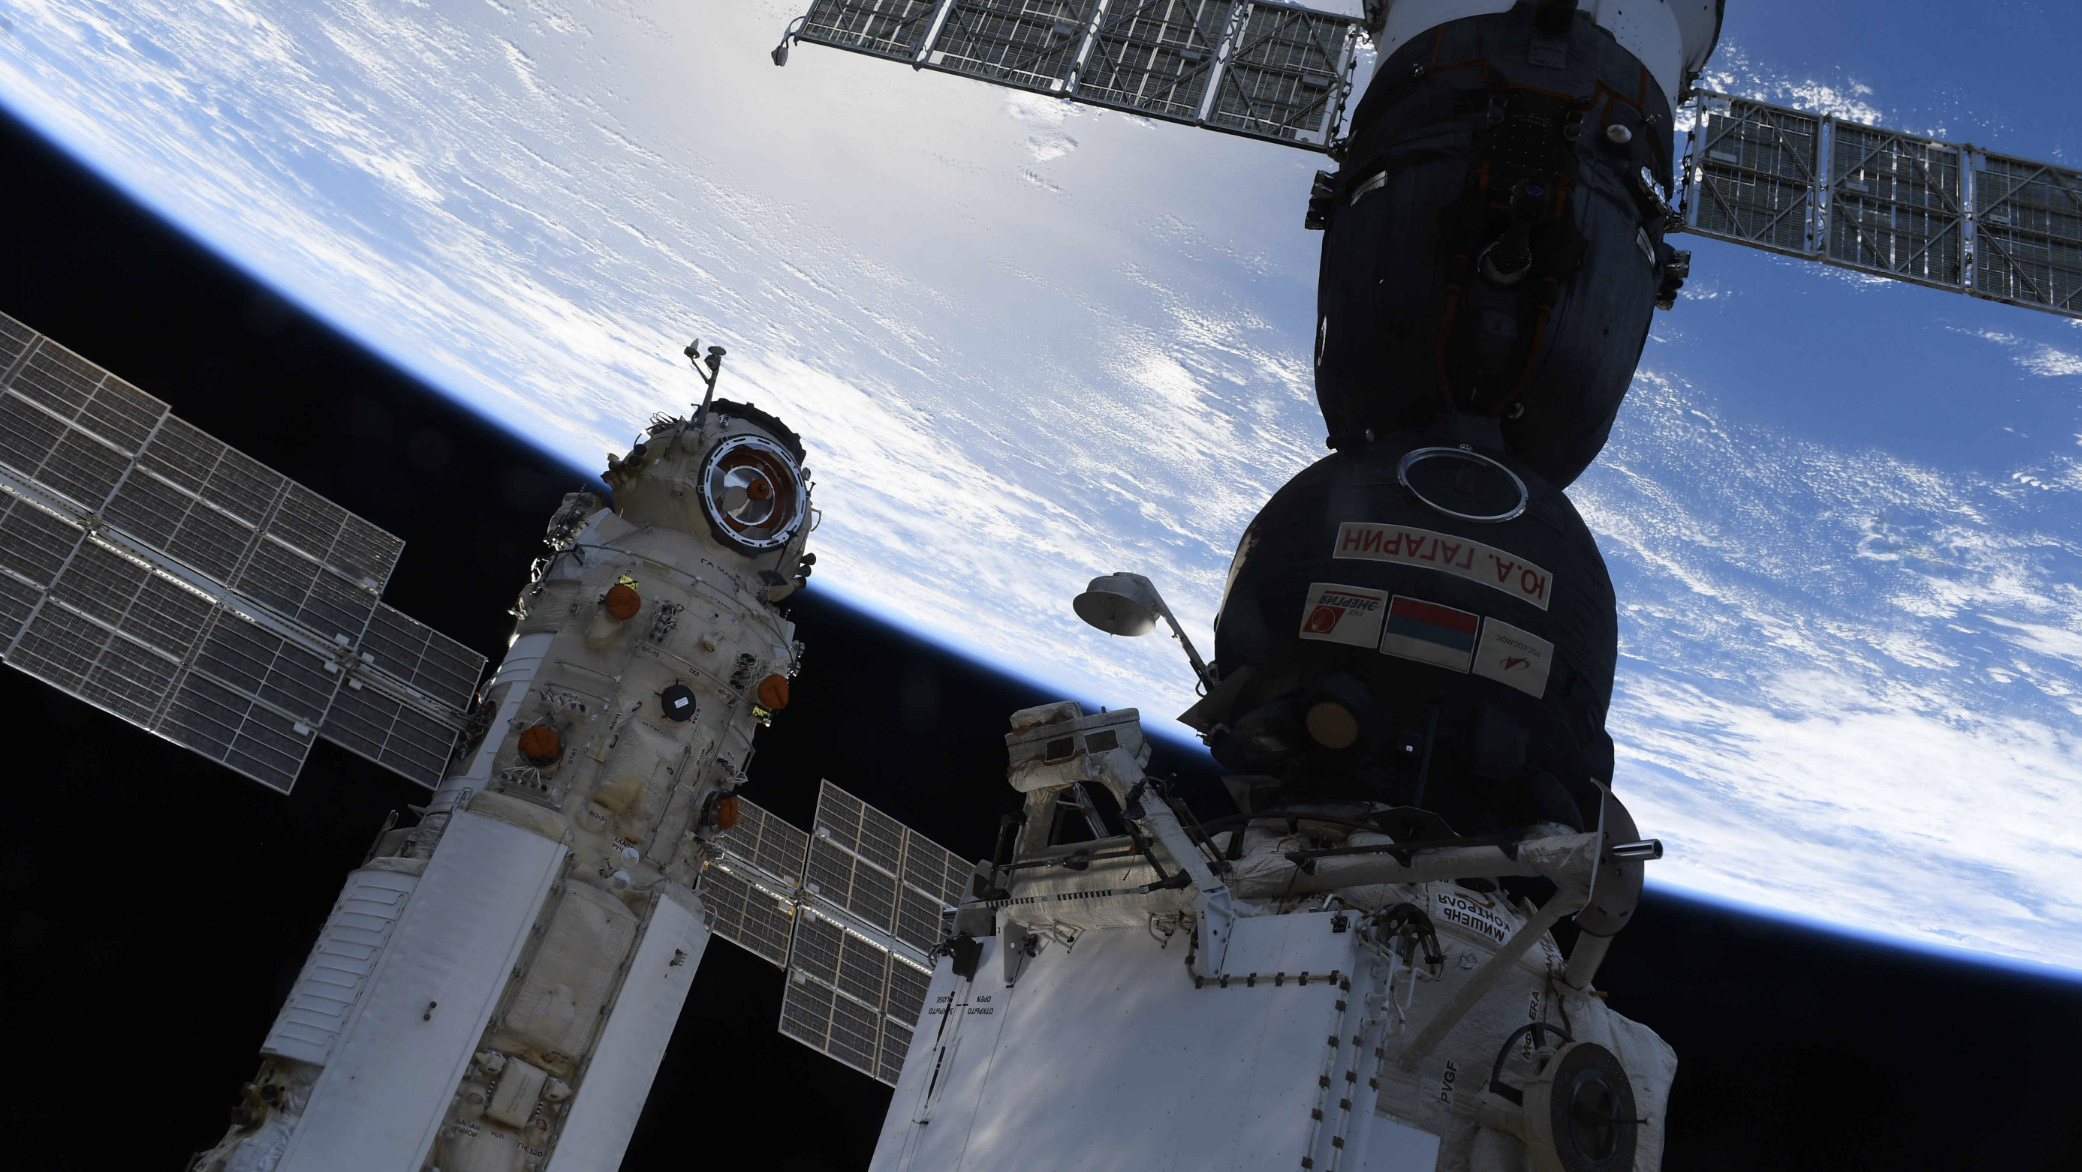 The Nauka module (left) docked to the ISS, with a Soyuz spacecraft (right) parked nearby.  (Photo: Roscosmos)